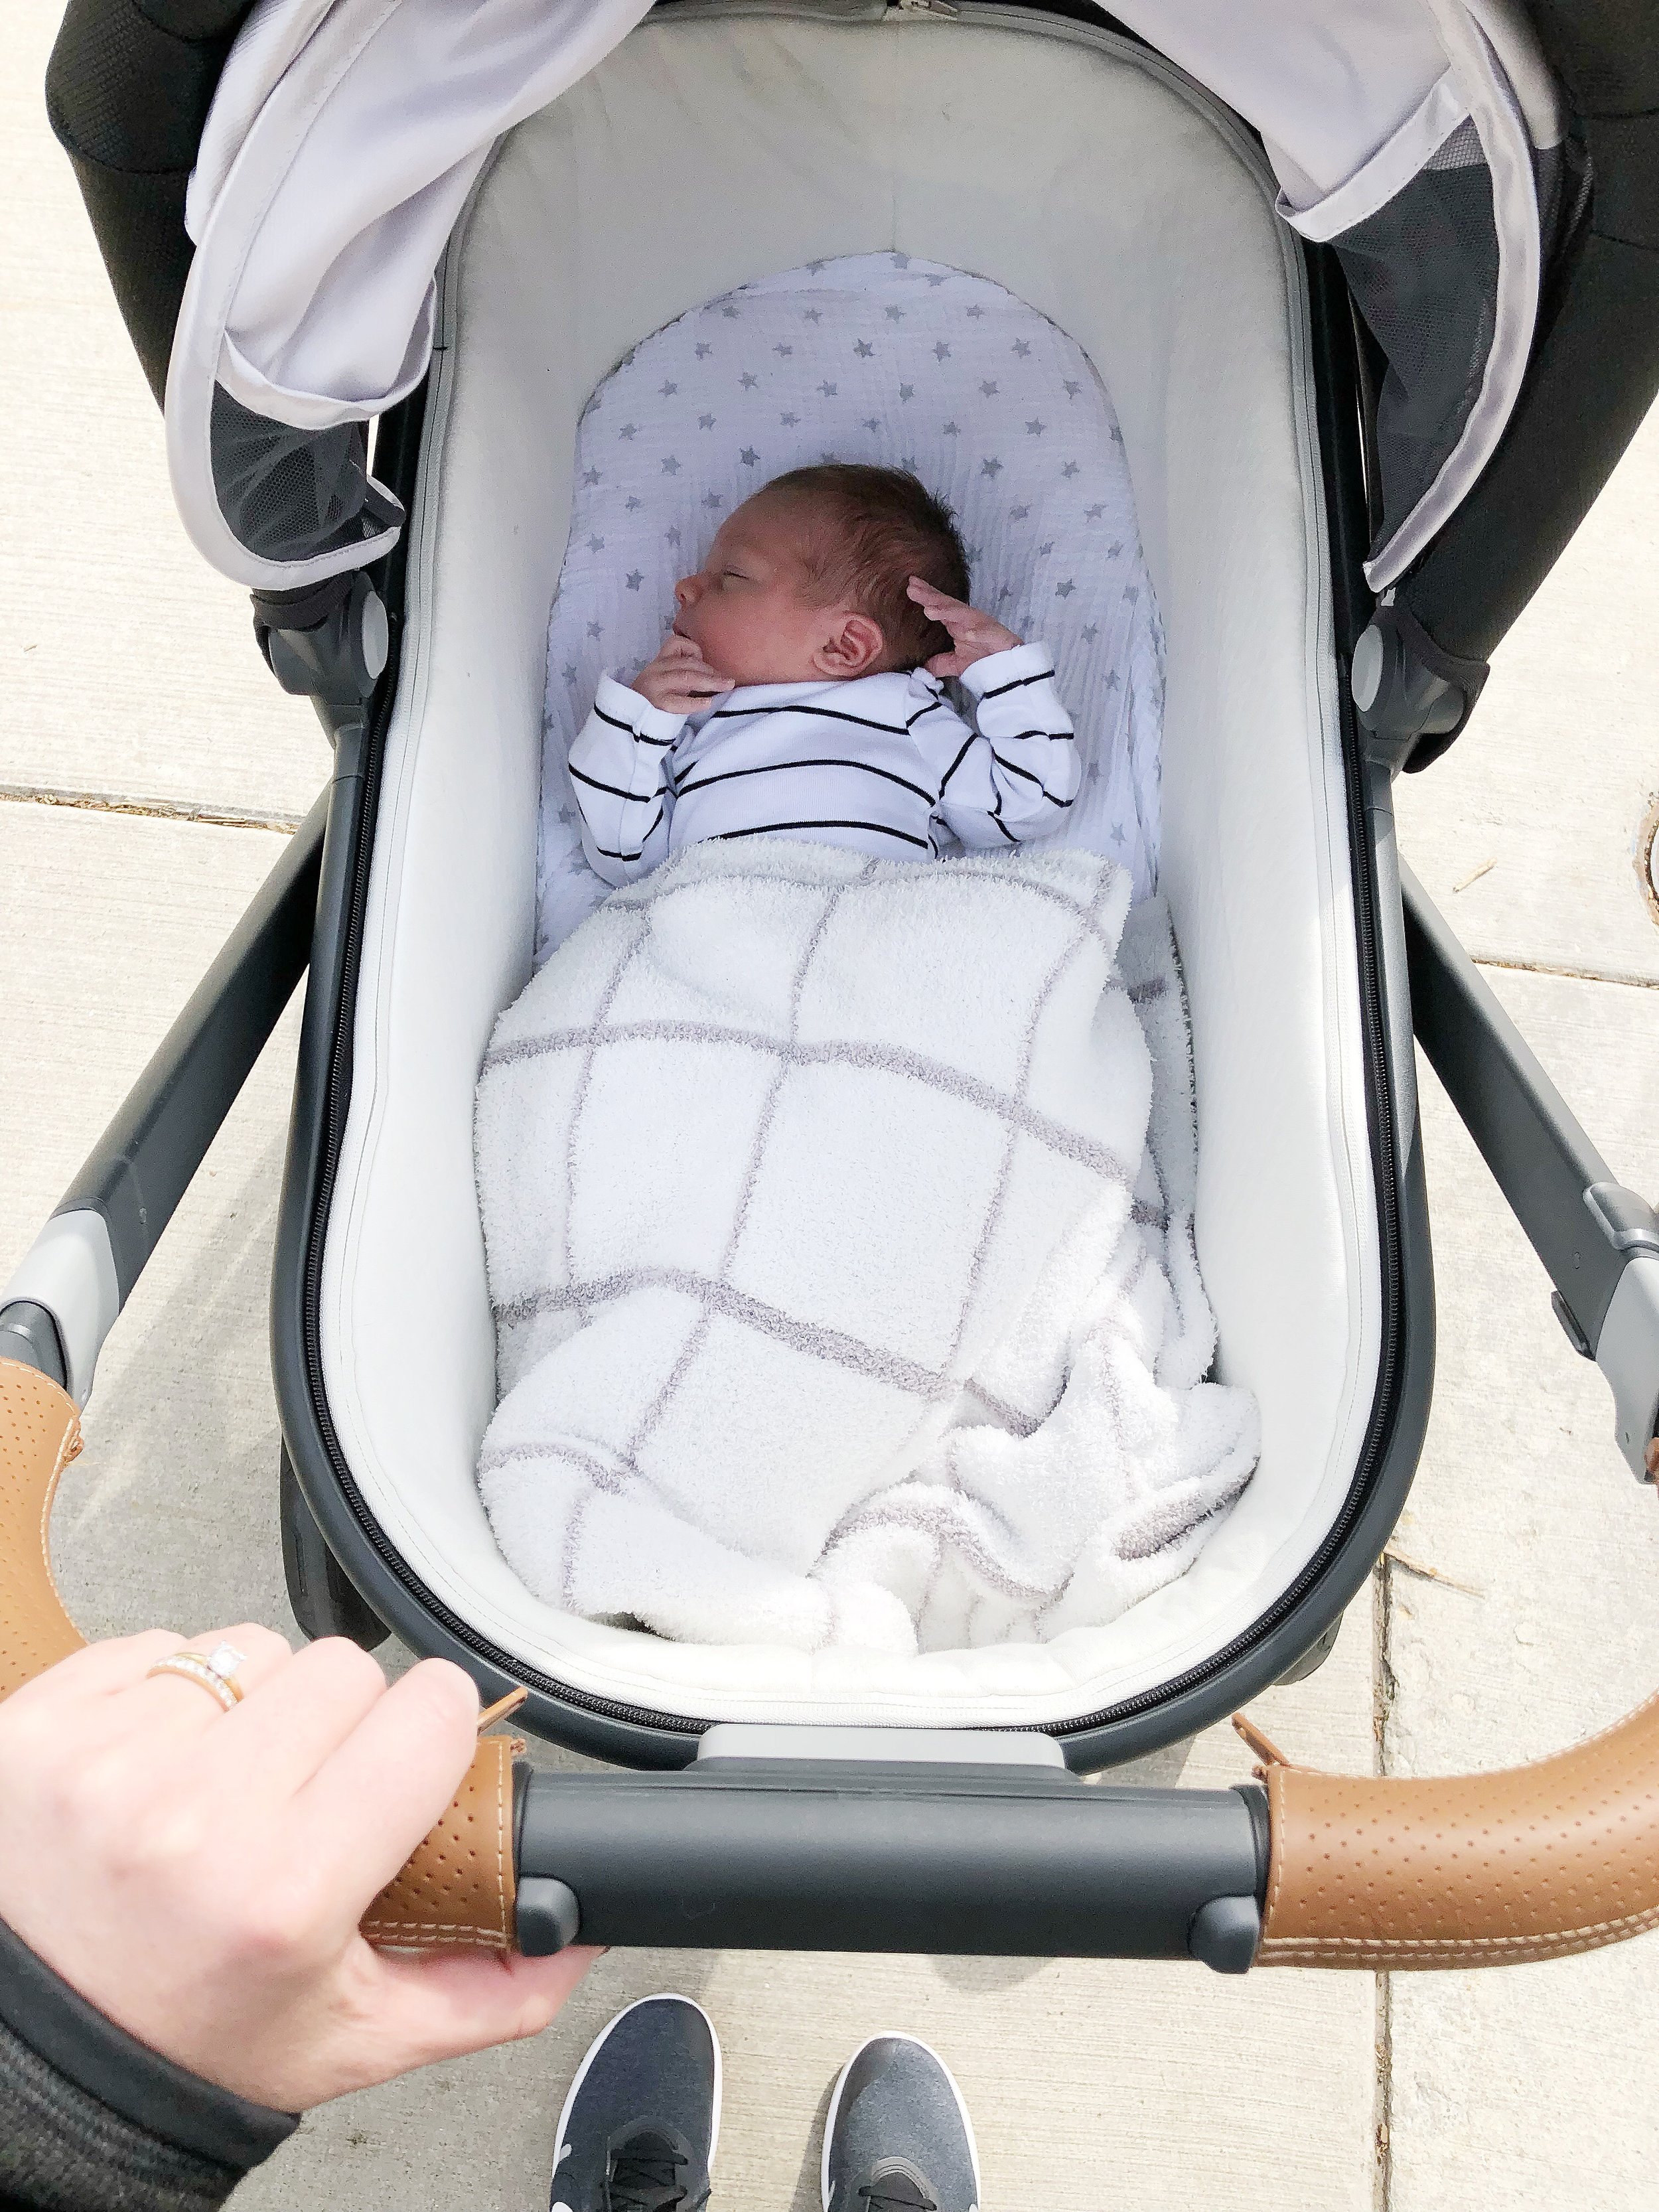 Newborn & Mama Essentials for the First Week at Home